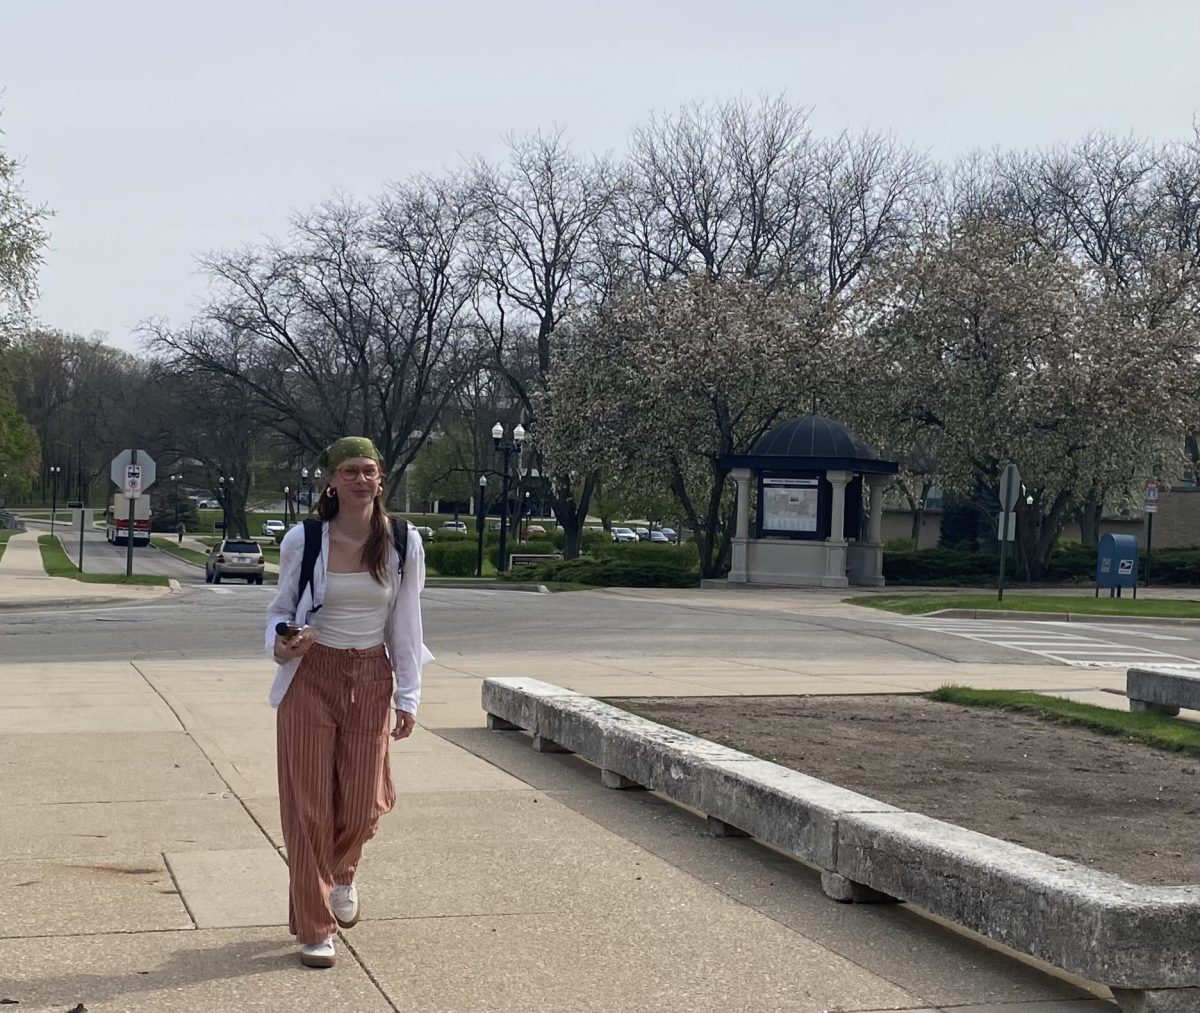 Sarah Marsh, a sophomore communications major, walks near the East Lagoon. With the chaotic weather of spring, students should dress in layers to fit the changing temperatures. (Brynn Krug | Northern Star)